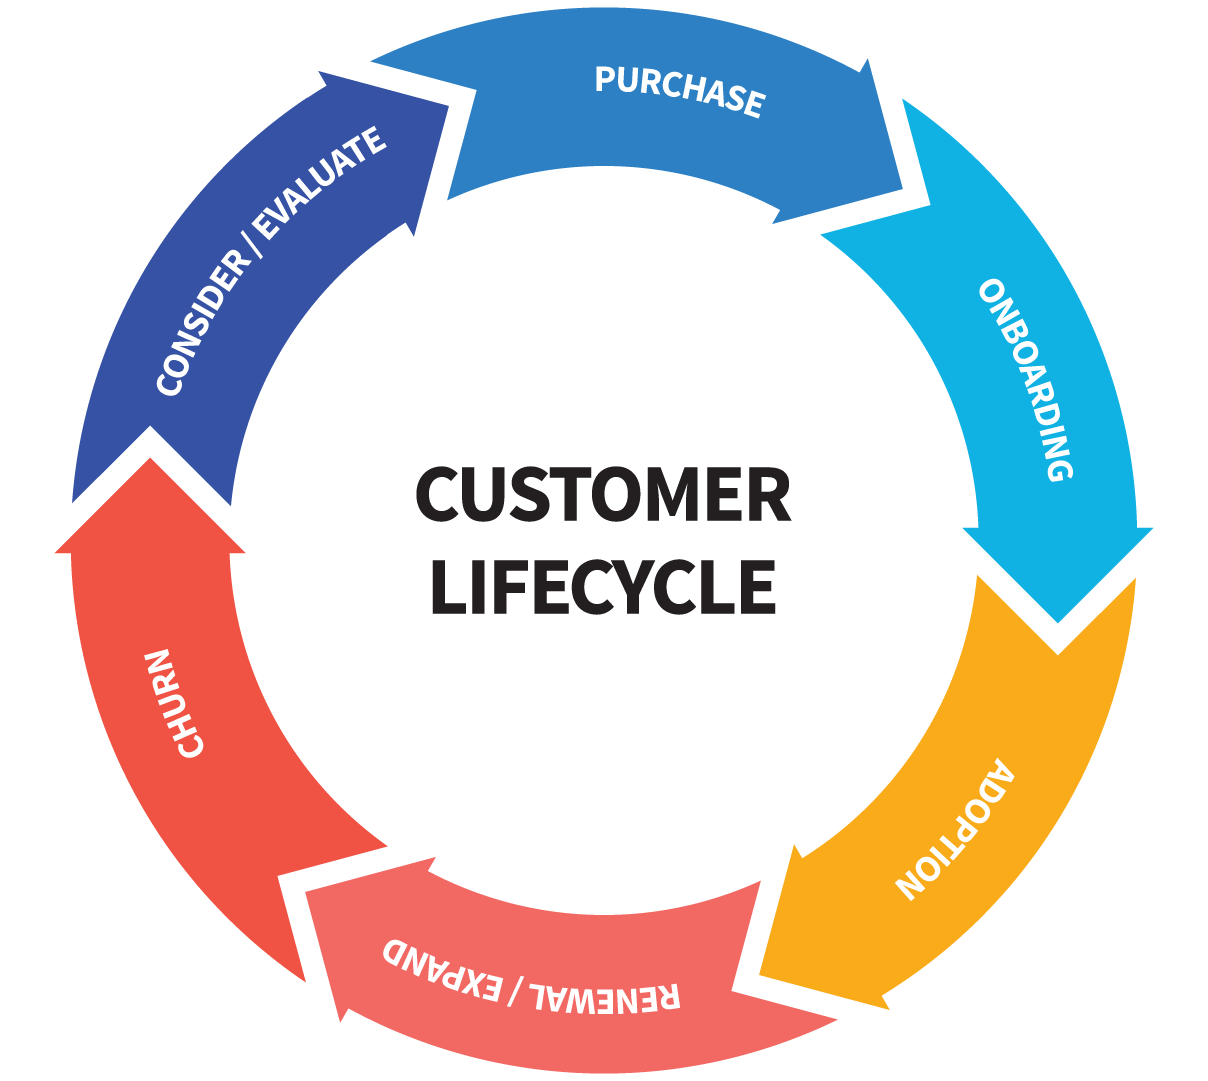 Illustration of a customer lifecycle (a circular pattern) in which a company has to go through an Evaluation, a Purchase, an Onboarding, an Adoption, and a Renewal/Expansion, while avoiding Churn altogether.